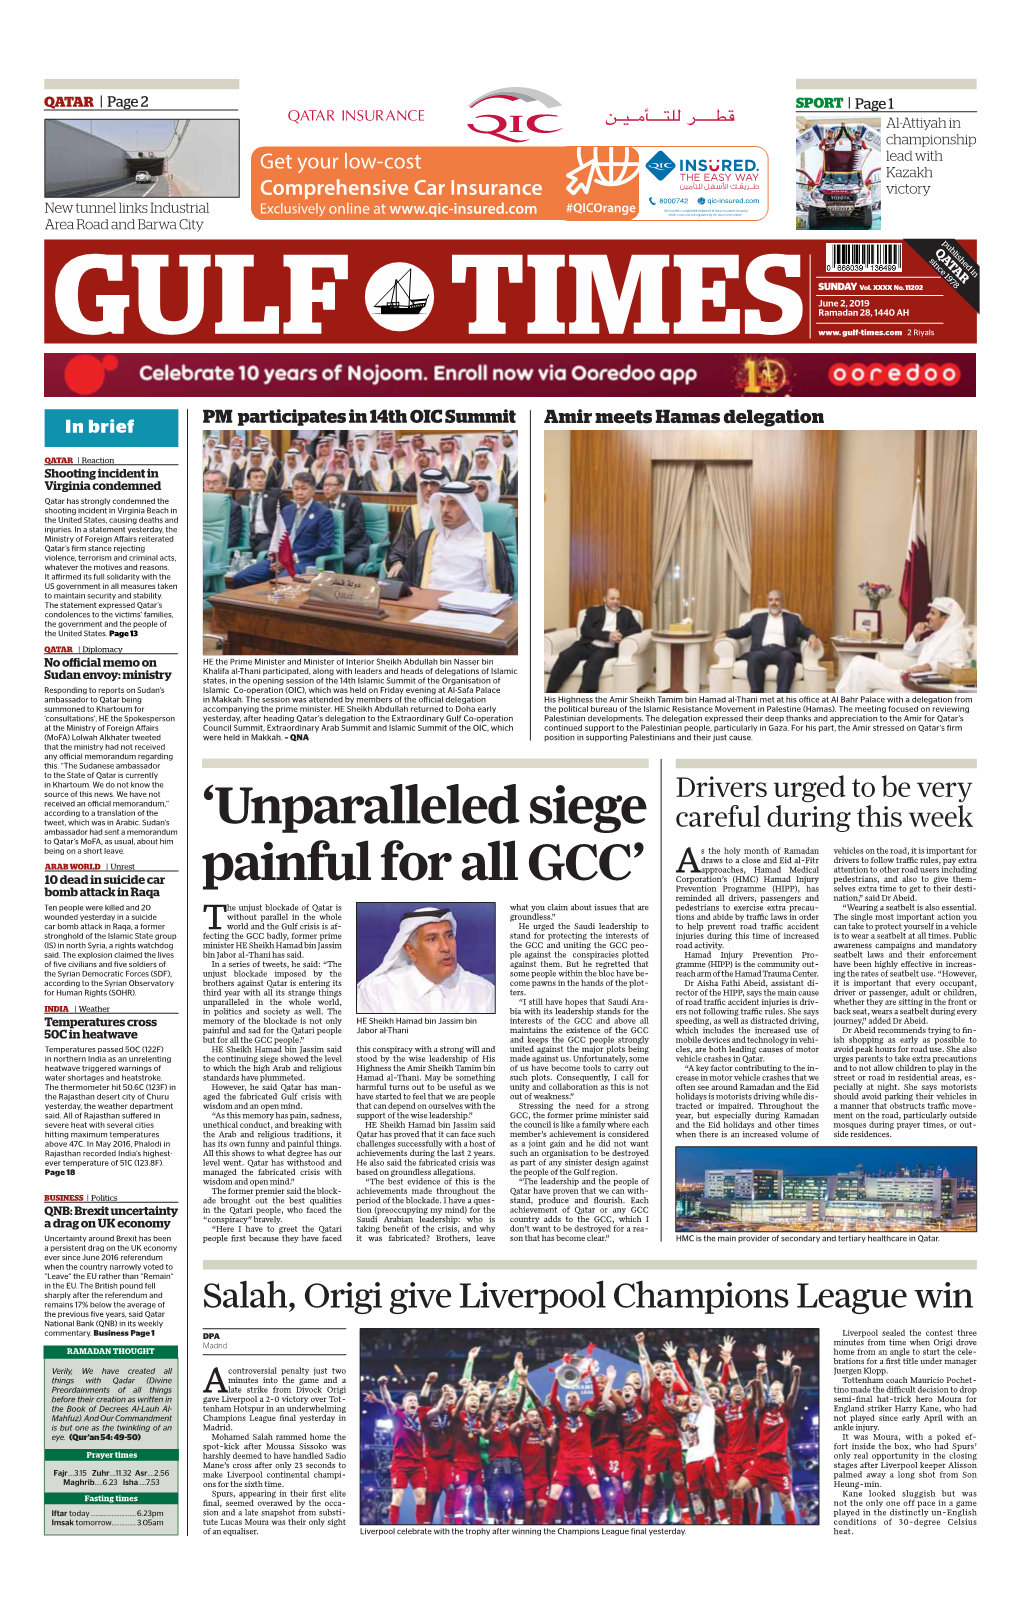 'Unparalleled Siege Painful for All GCC'